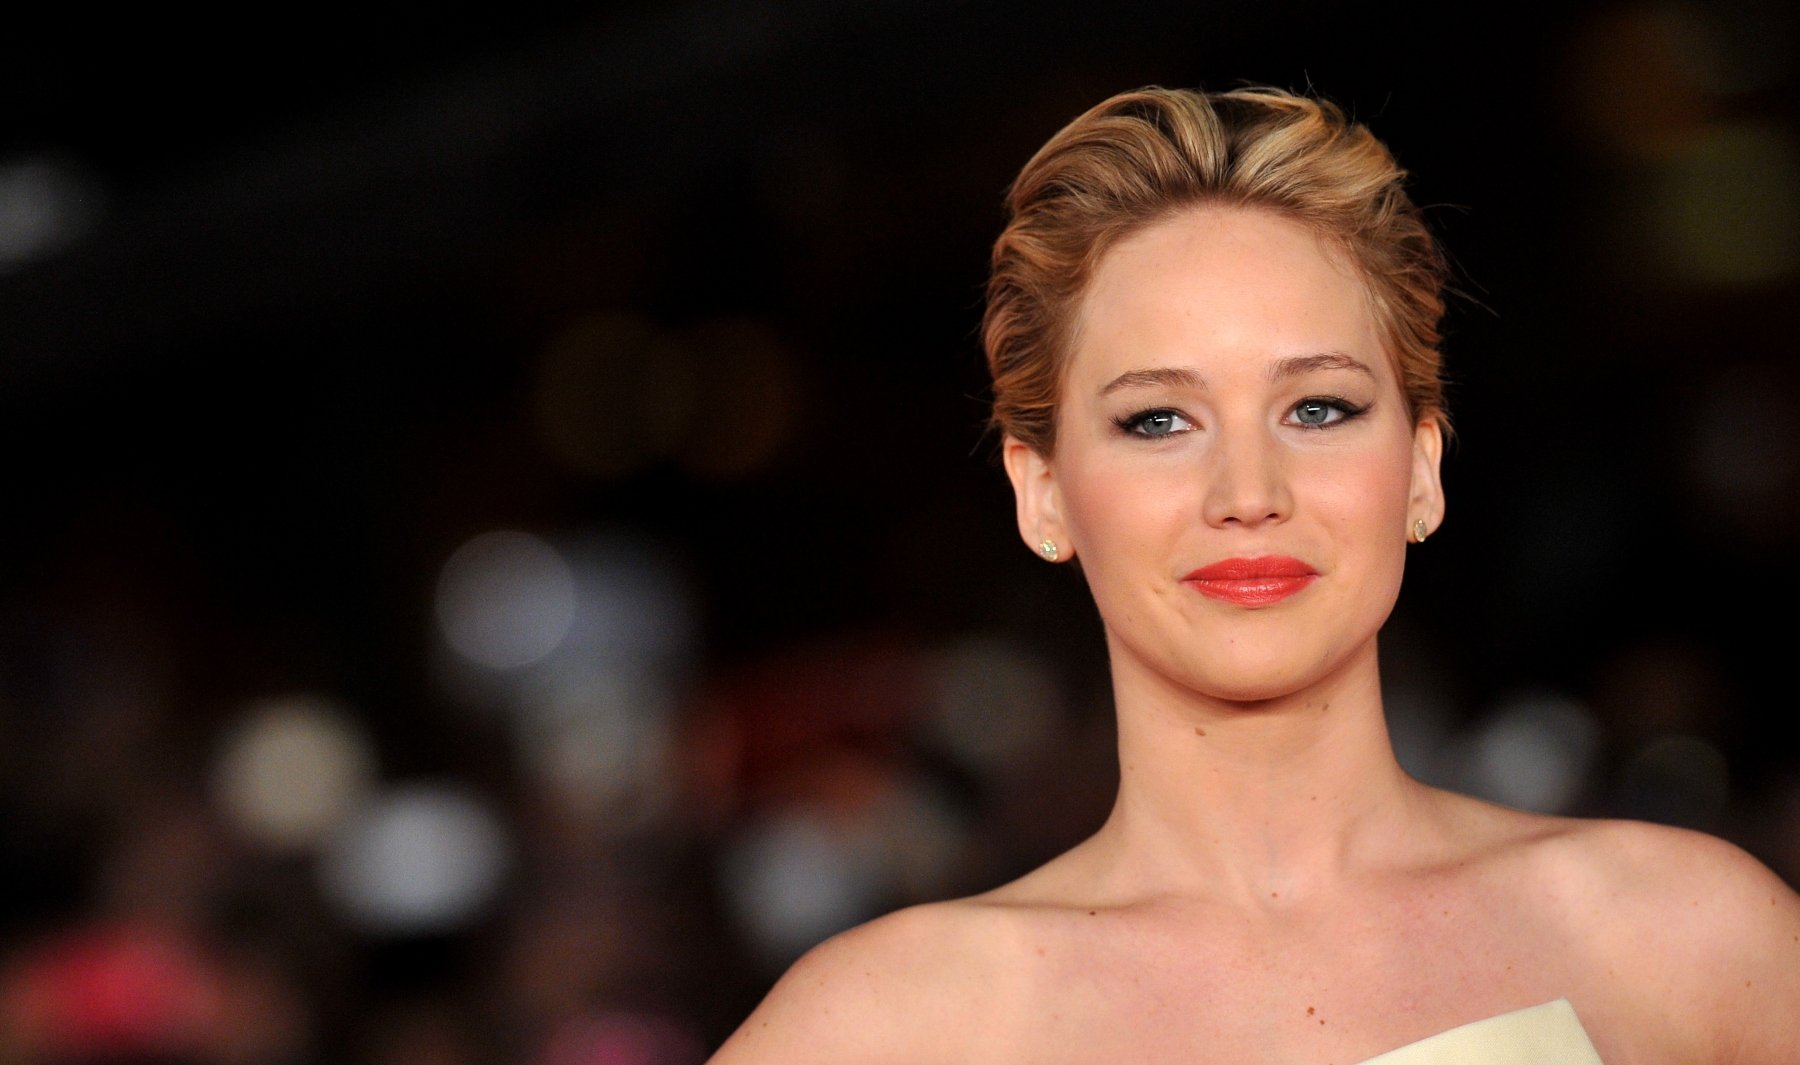 Jennifer Lawrence arrives at 'The Hunger Games: Catching Fire' screening